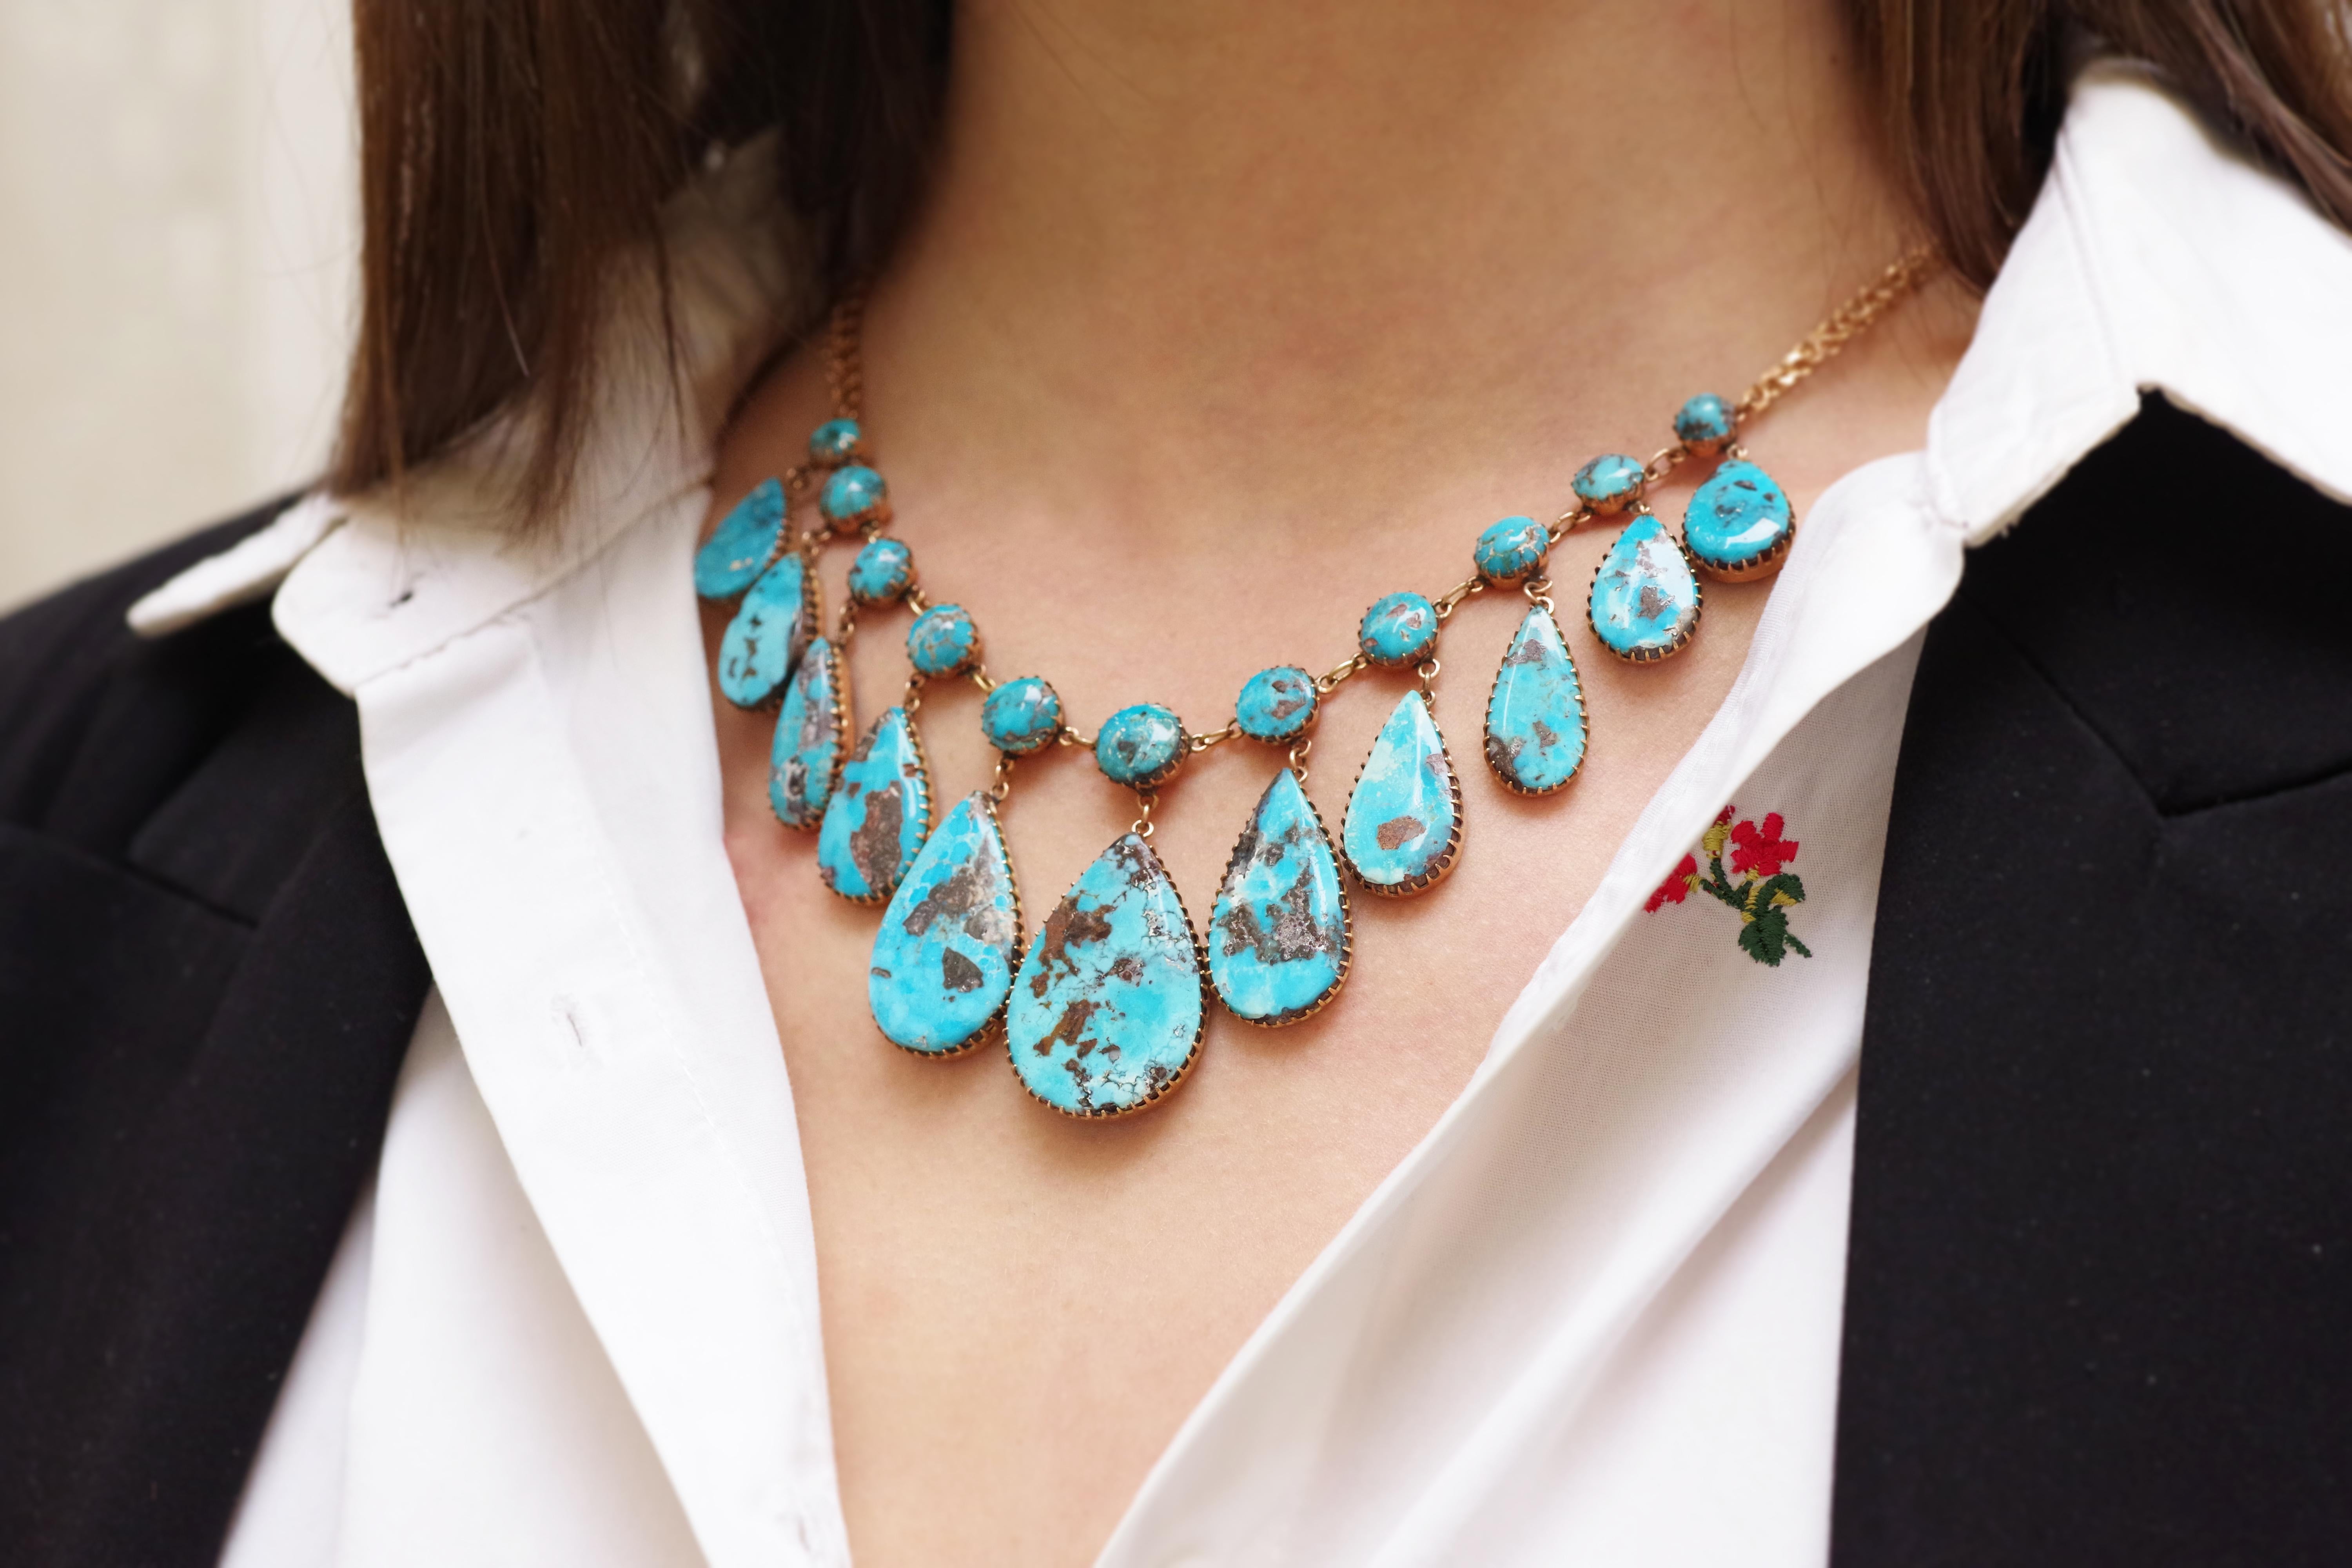 Russian turquoise drapery necklace in 14 karat rose gold. Drapery necklace composed of eleven drop-shaped plates topped with turquoise cabochons. The turquoise is a beautiful lagoon blue with natural brown inclusions (pyrites and matrix). The